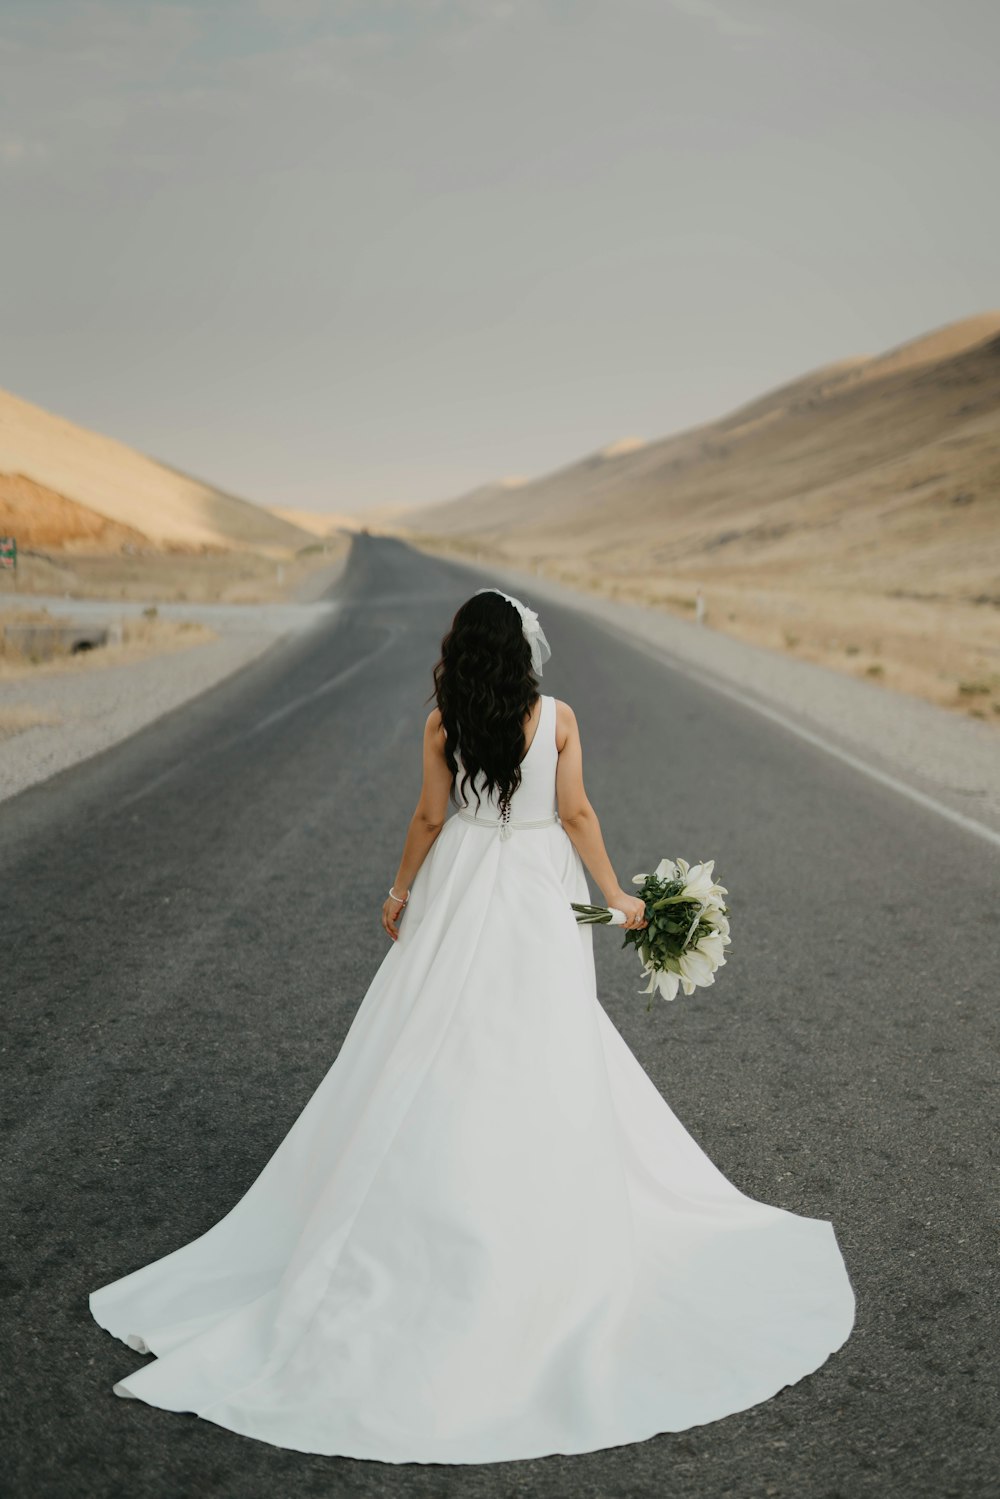 woman in white wedding dress holding bouquet of flowers walking on gray asphalt road during daytime